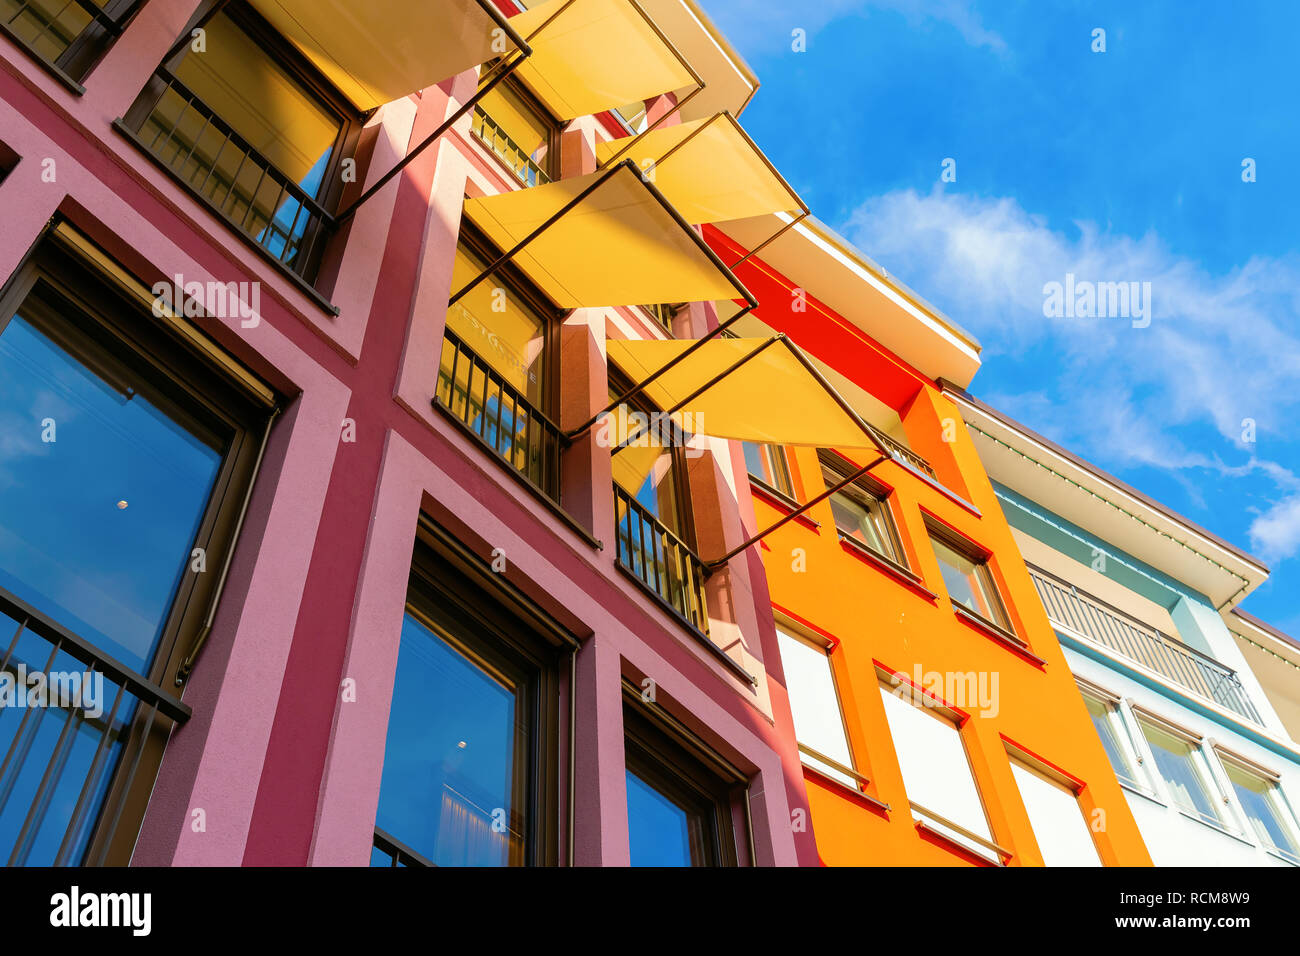 picture of colorful house facades with awnings Stock Photo